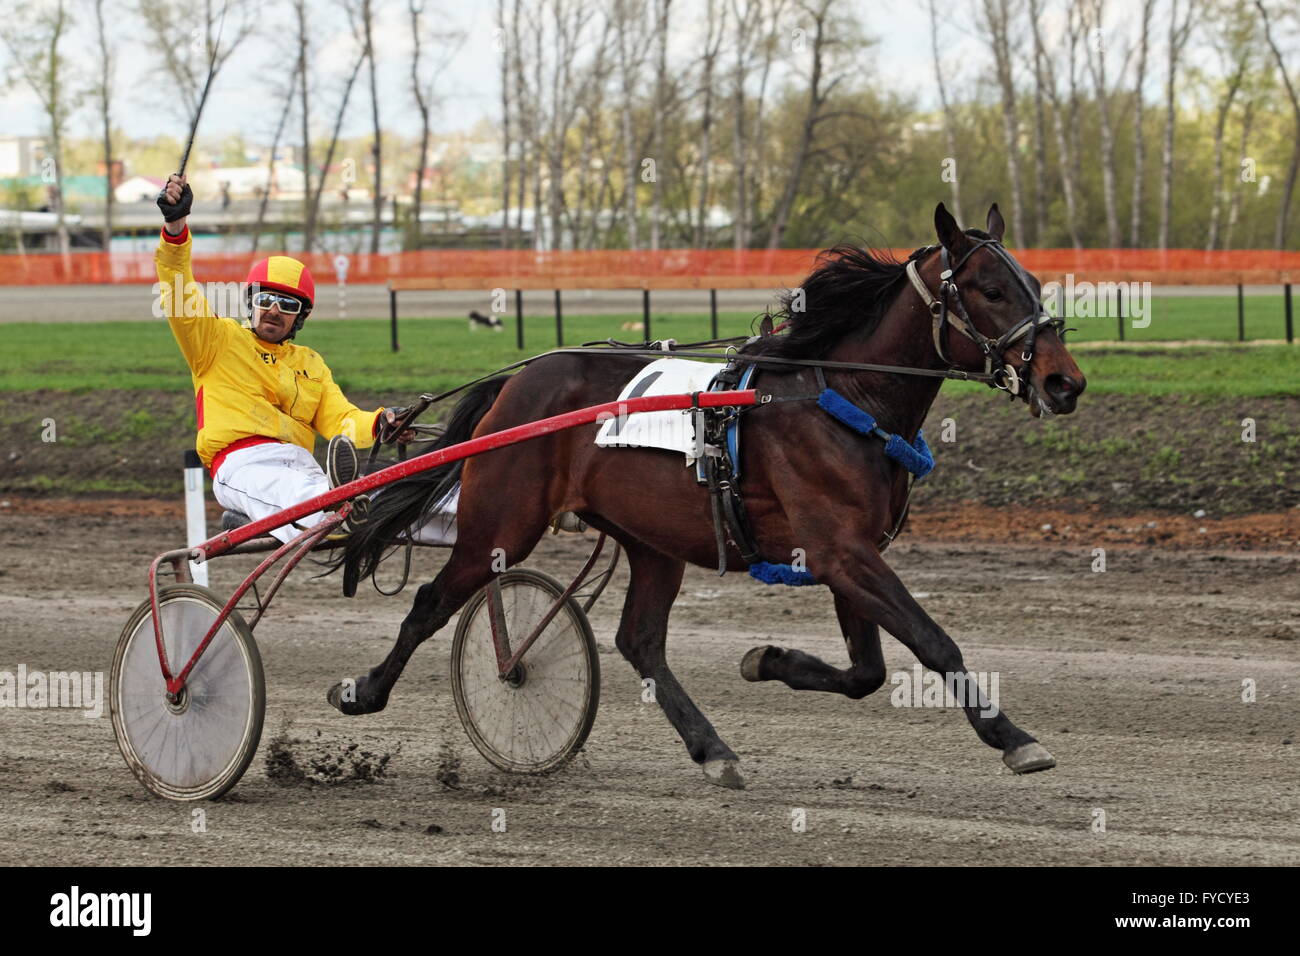 Standardbred is an American horse breed trotter making a lap in the horse race Stock Photo